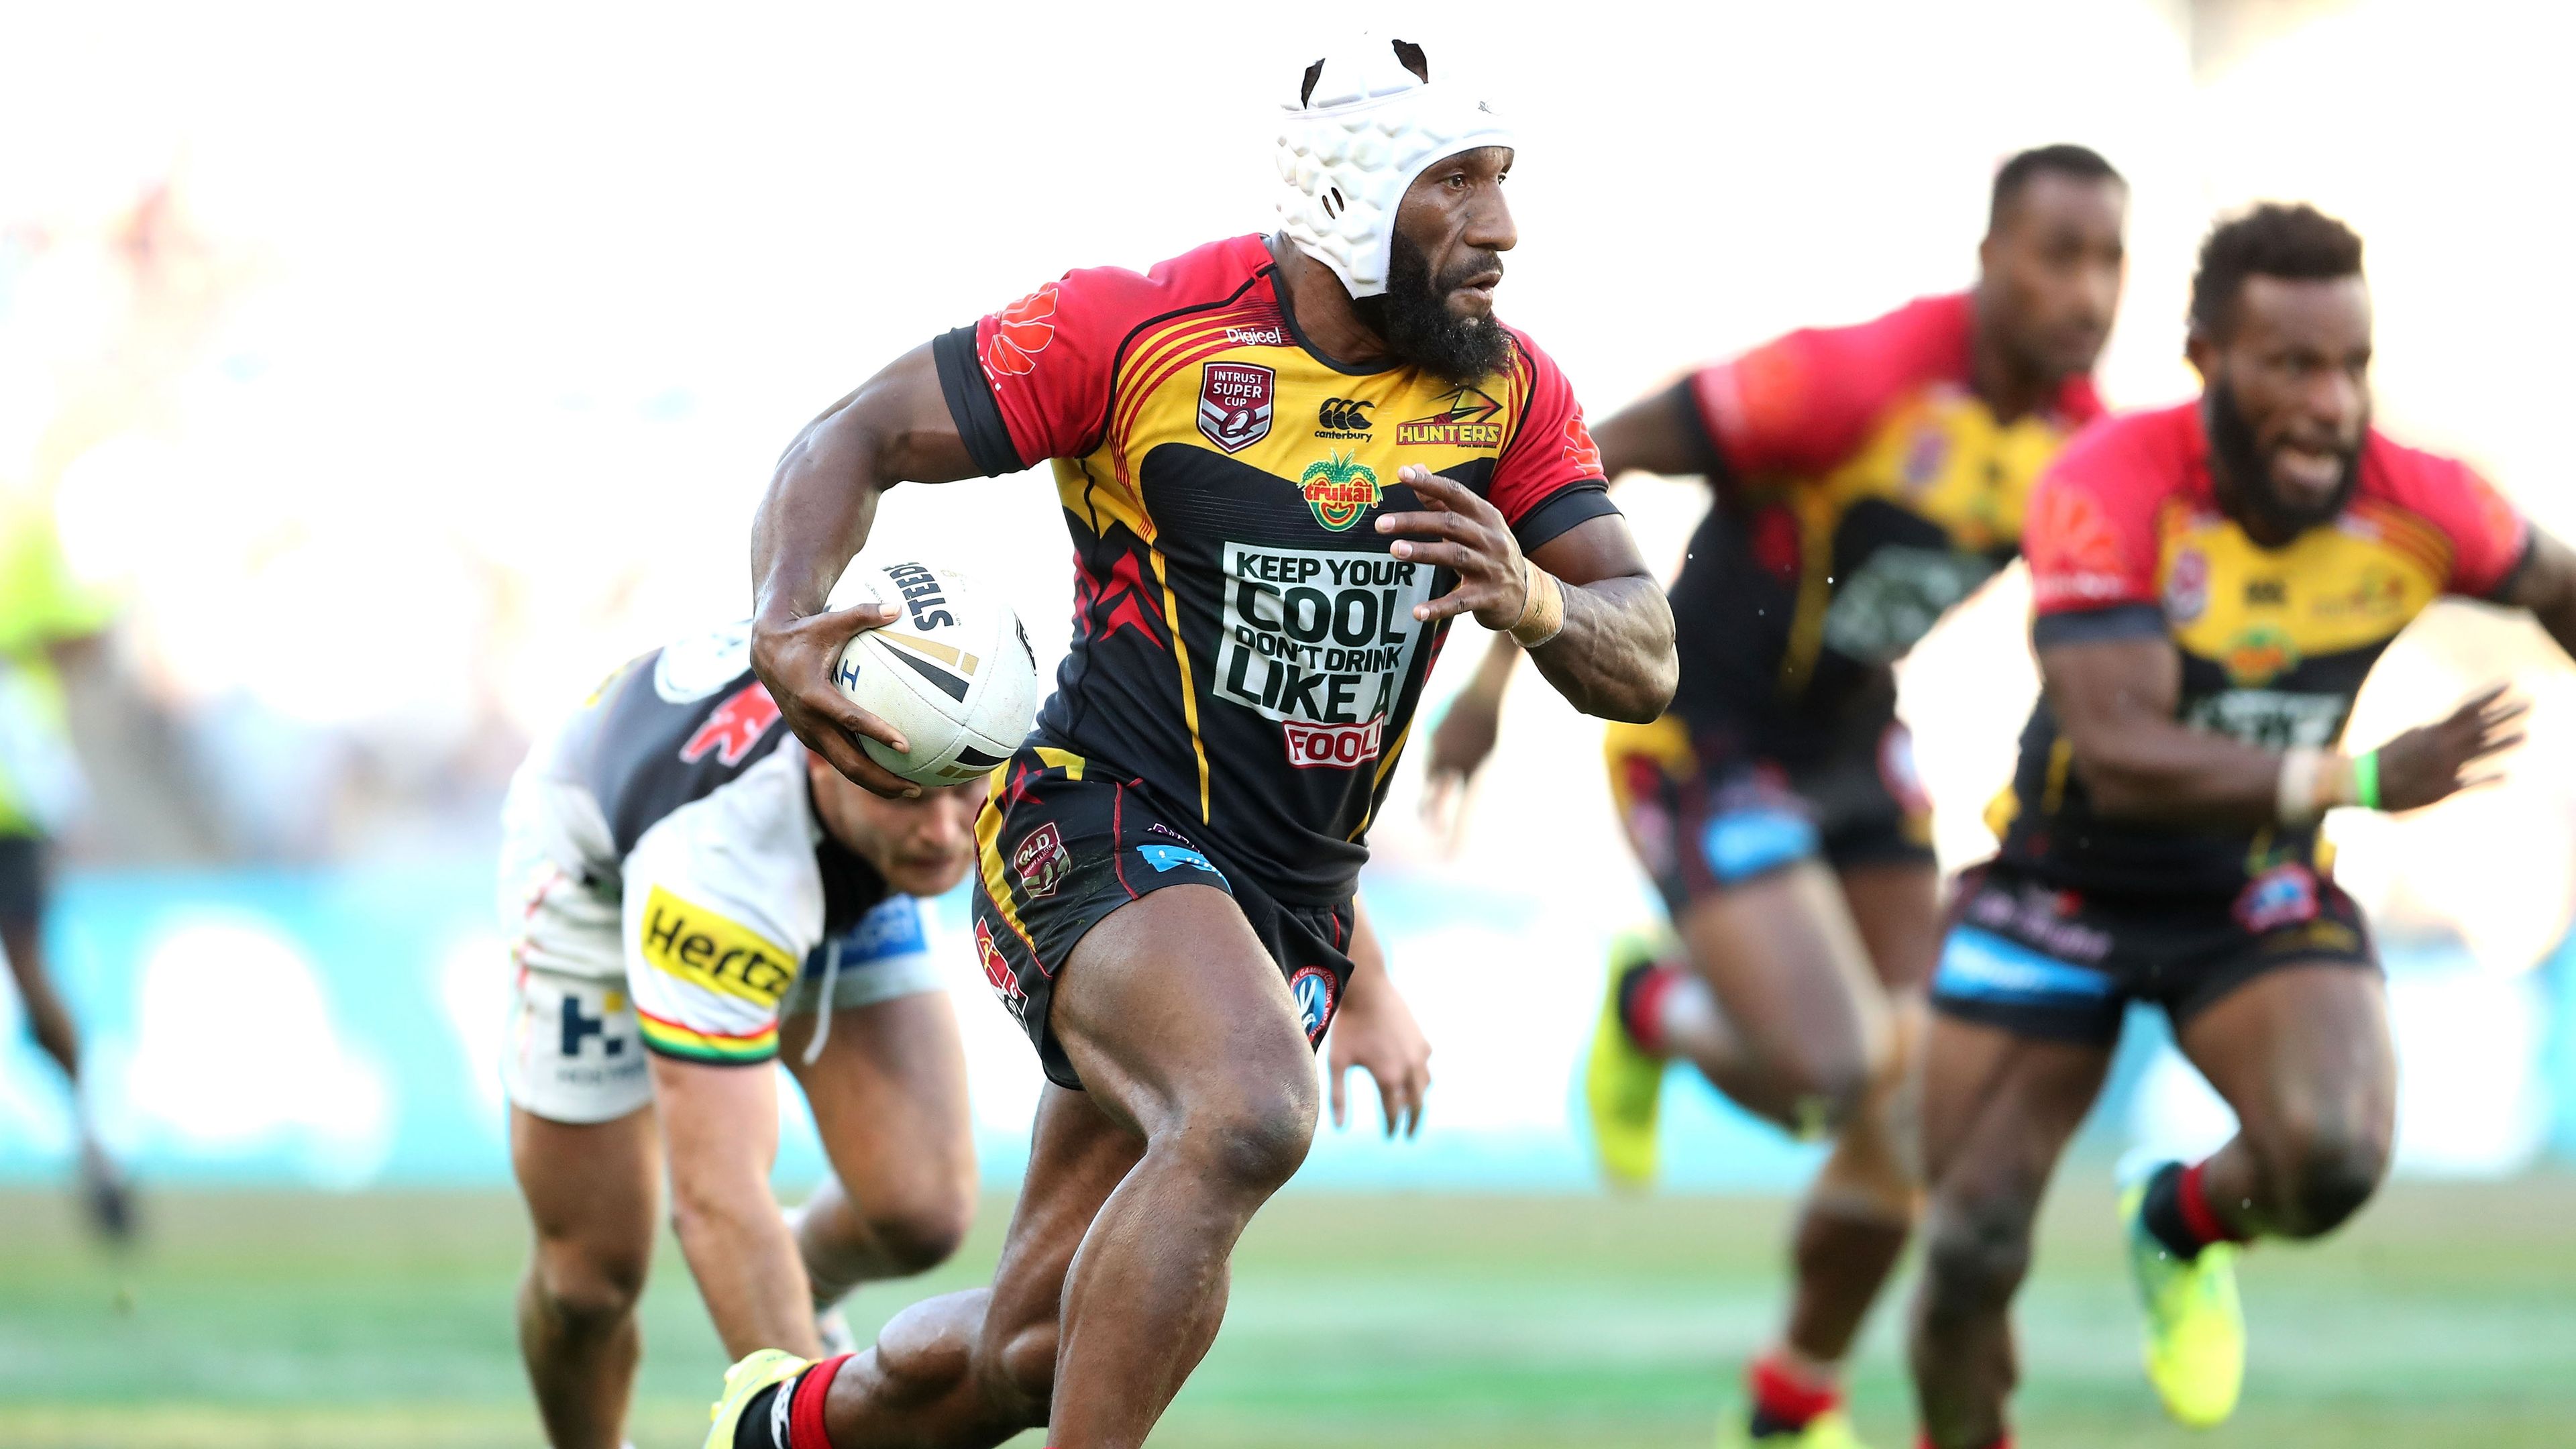 The PNG Hunters in the 2017 State Championships Final against the Penrith Panthers on NRL Grand Final day.